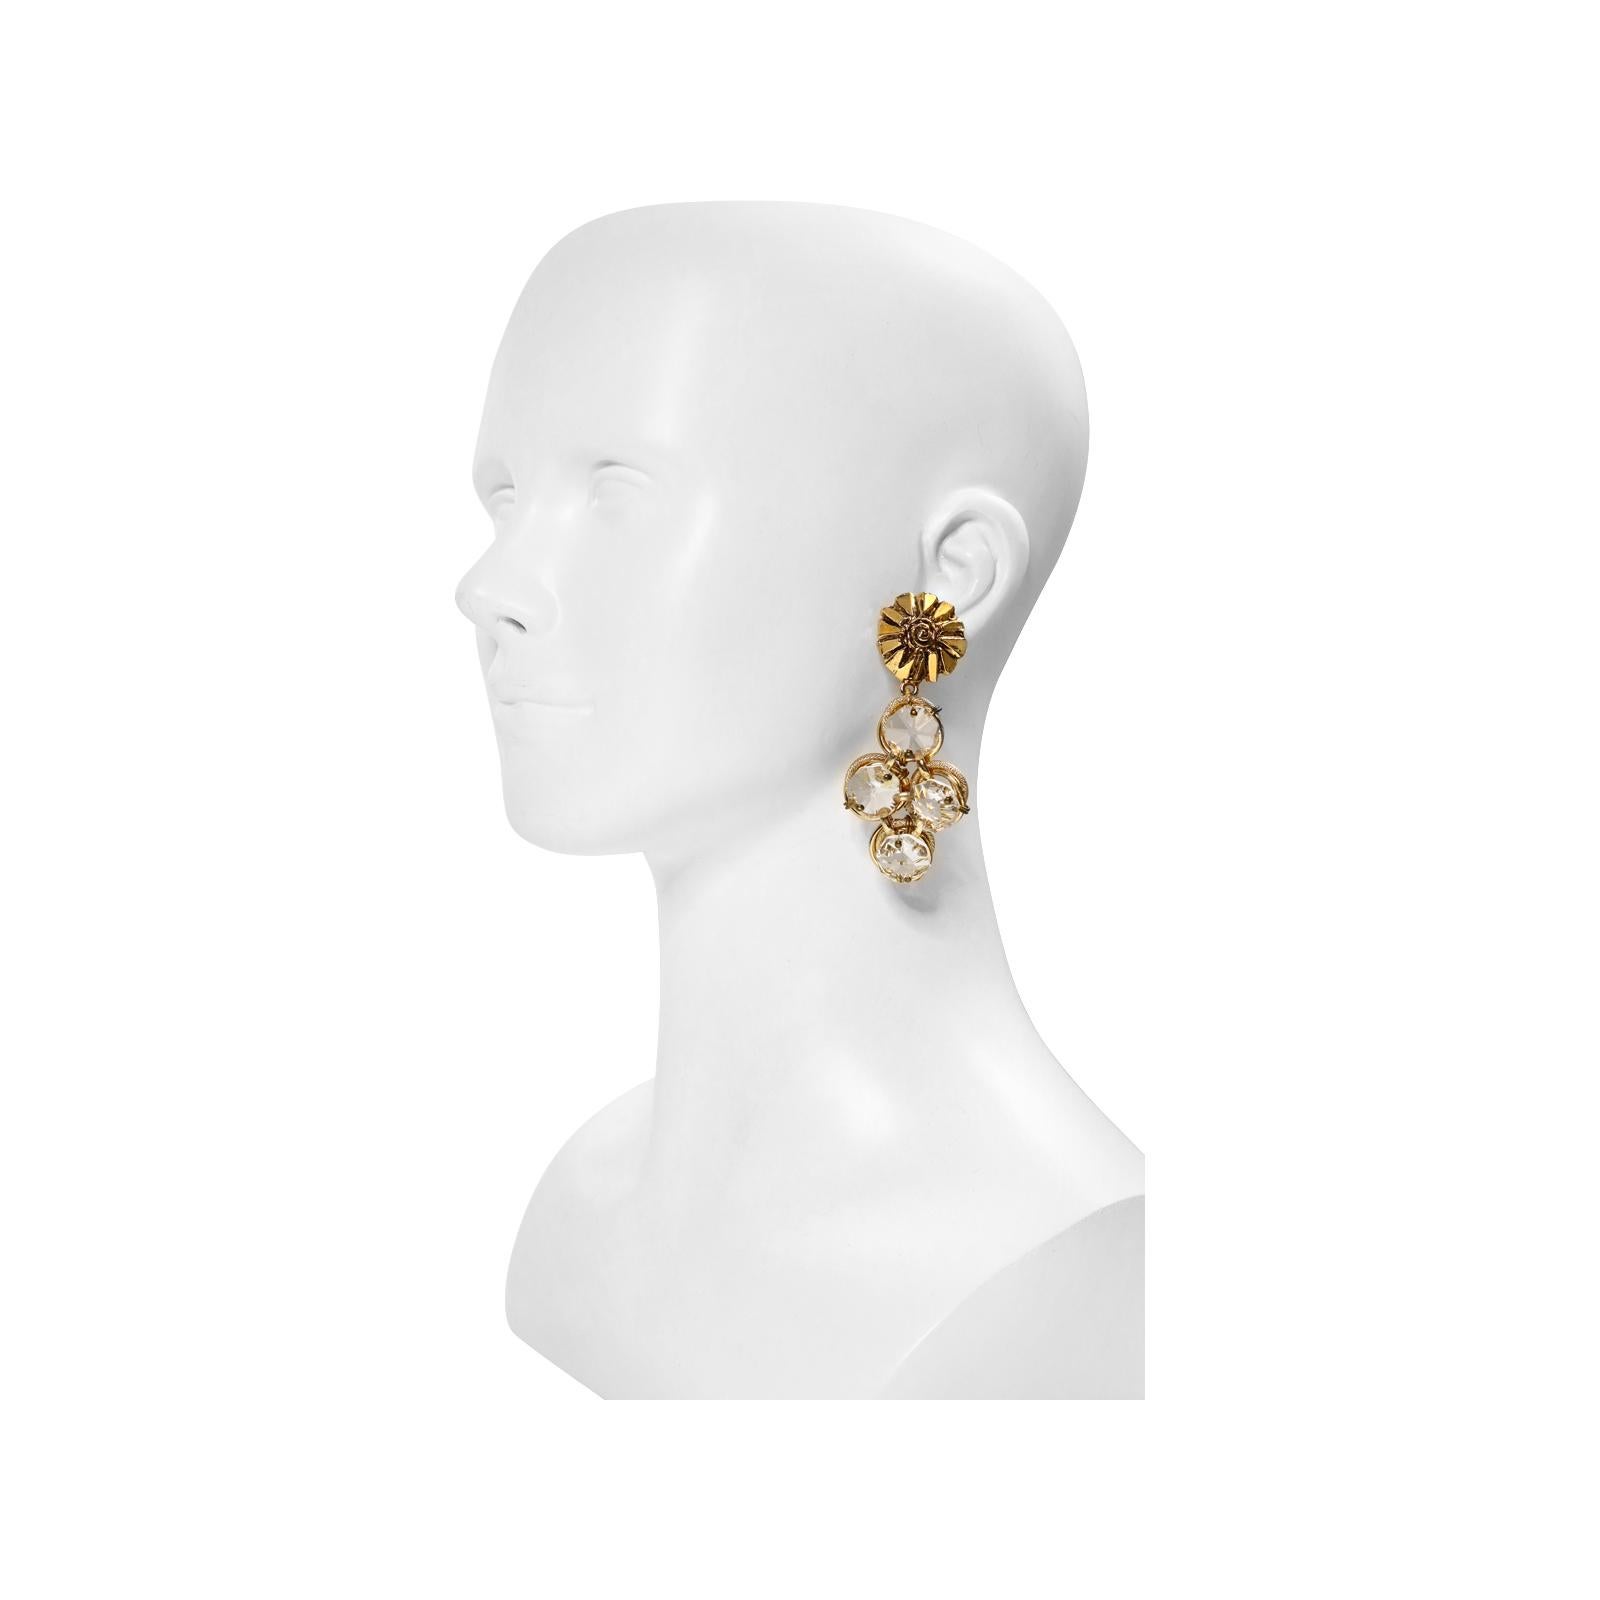 Vintage Poggi Paris Gold Tone with Large Crystals Dangling Earrings, circa 1990s For Sale 2